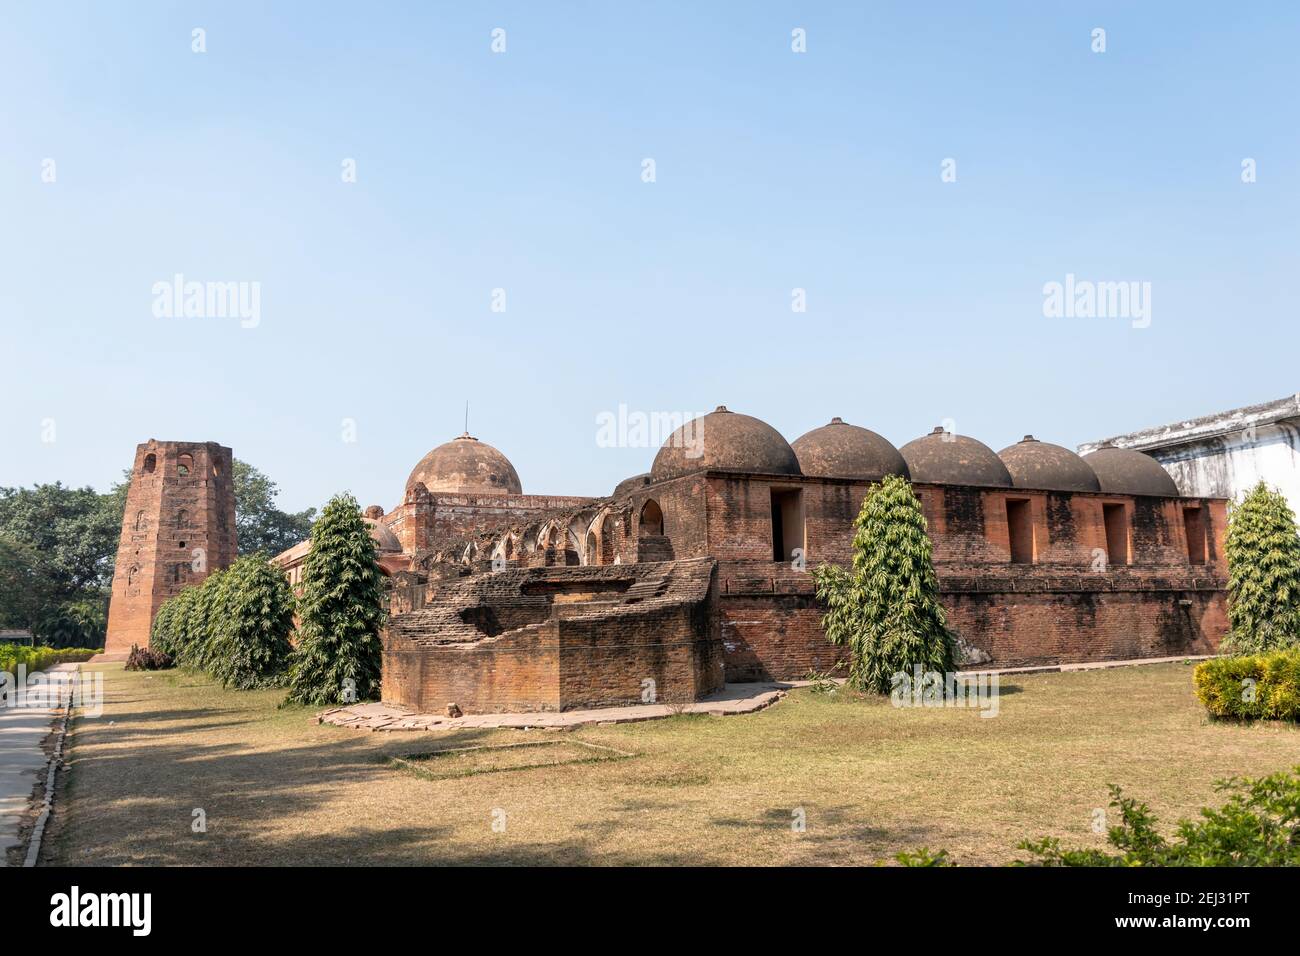 View of Katra Masjid, one of the largest caravanserais in the Indian subcontinent. Located at Barowaritala, Murshidabad, West Bengal, India. Islamic A Stock Photo